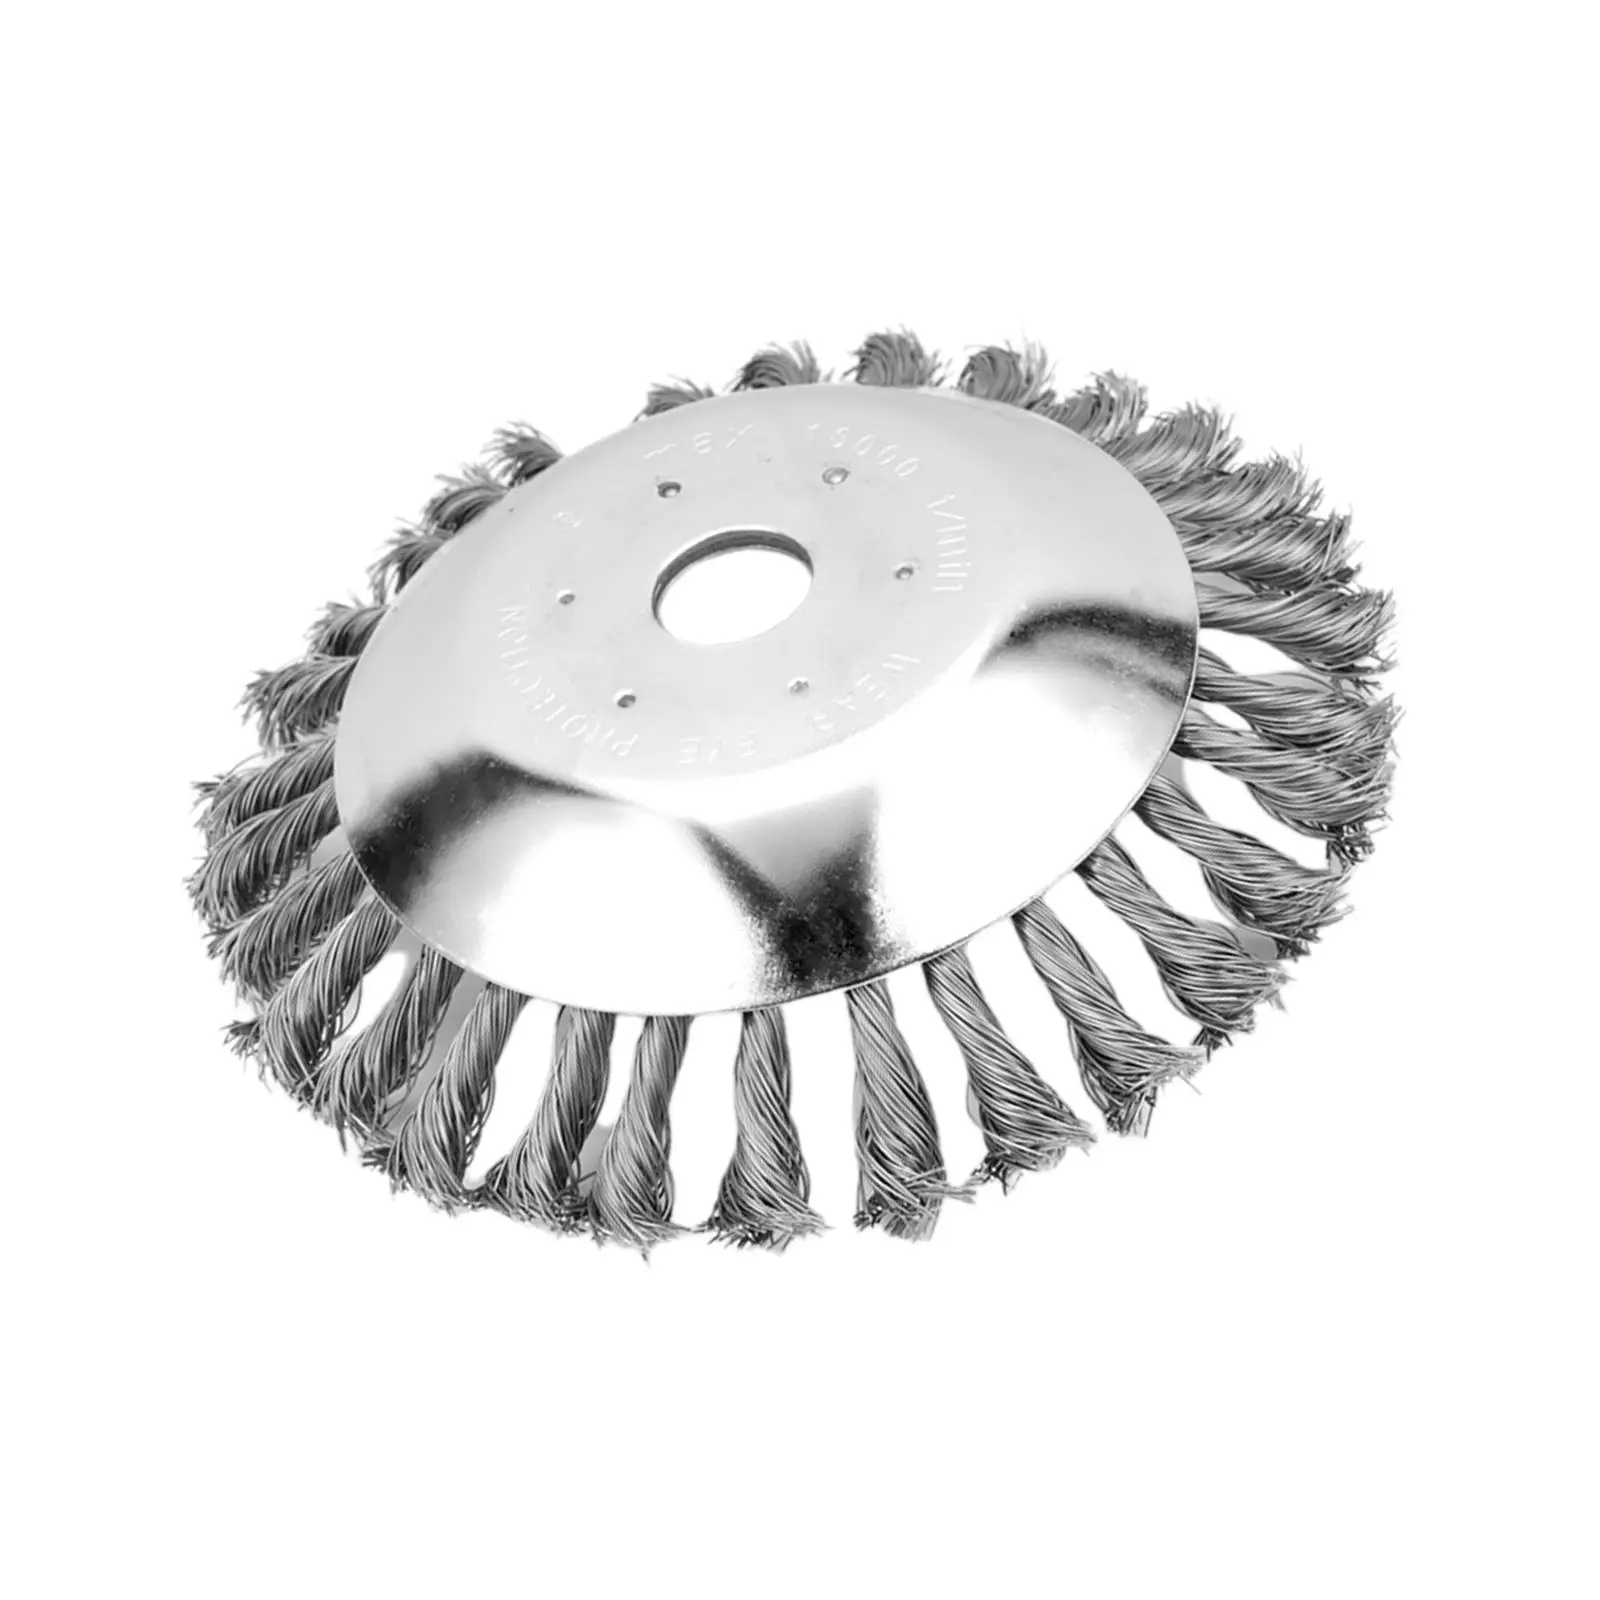 Wire Wheel Steel Brush Parts Replacements Trimmer Head Round Grass Weeding Wheel Mower Weeding Tray for Pavement Joints